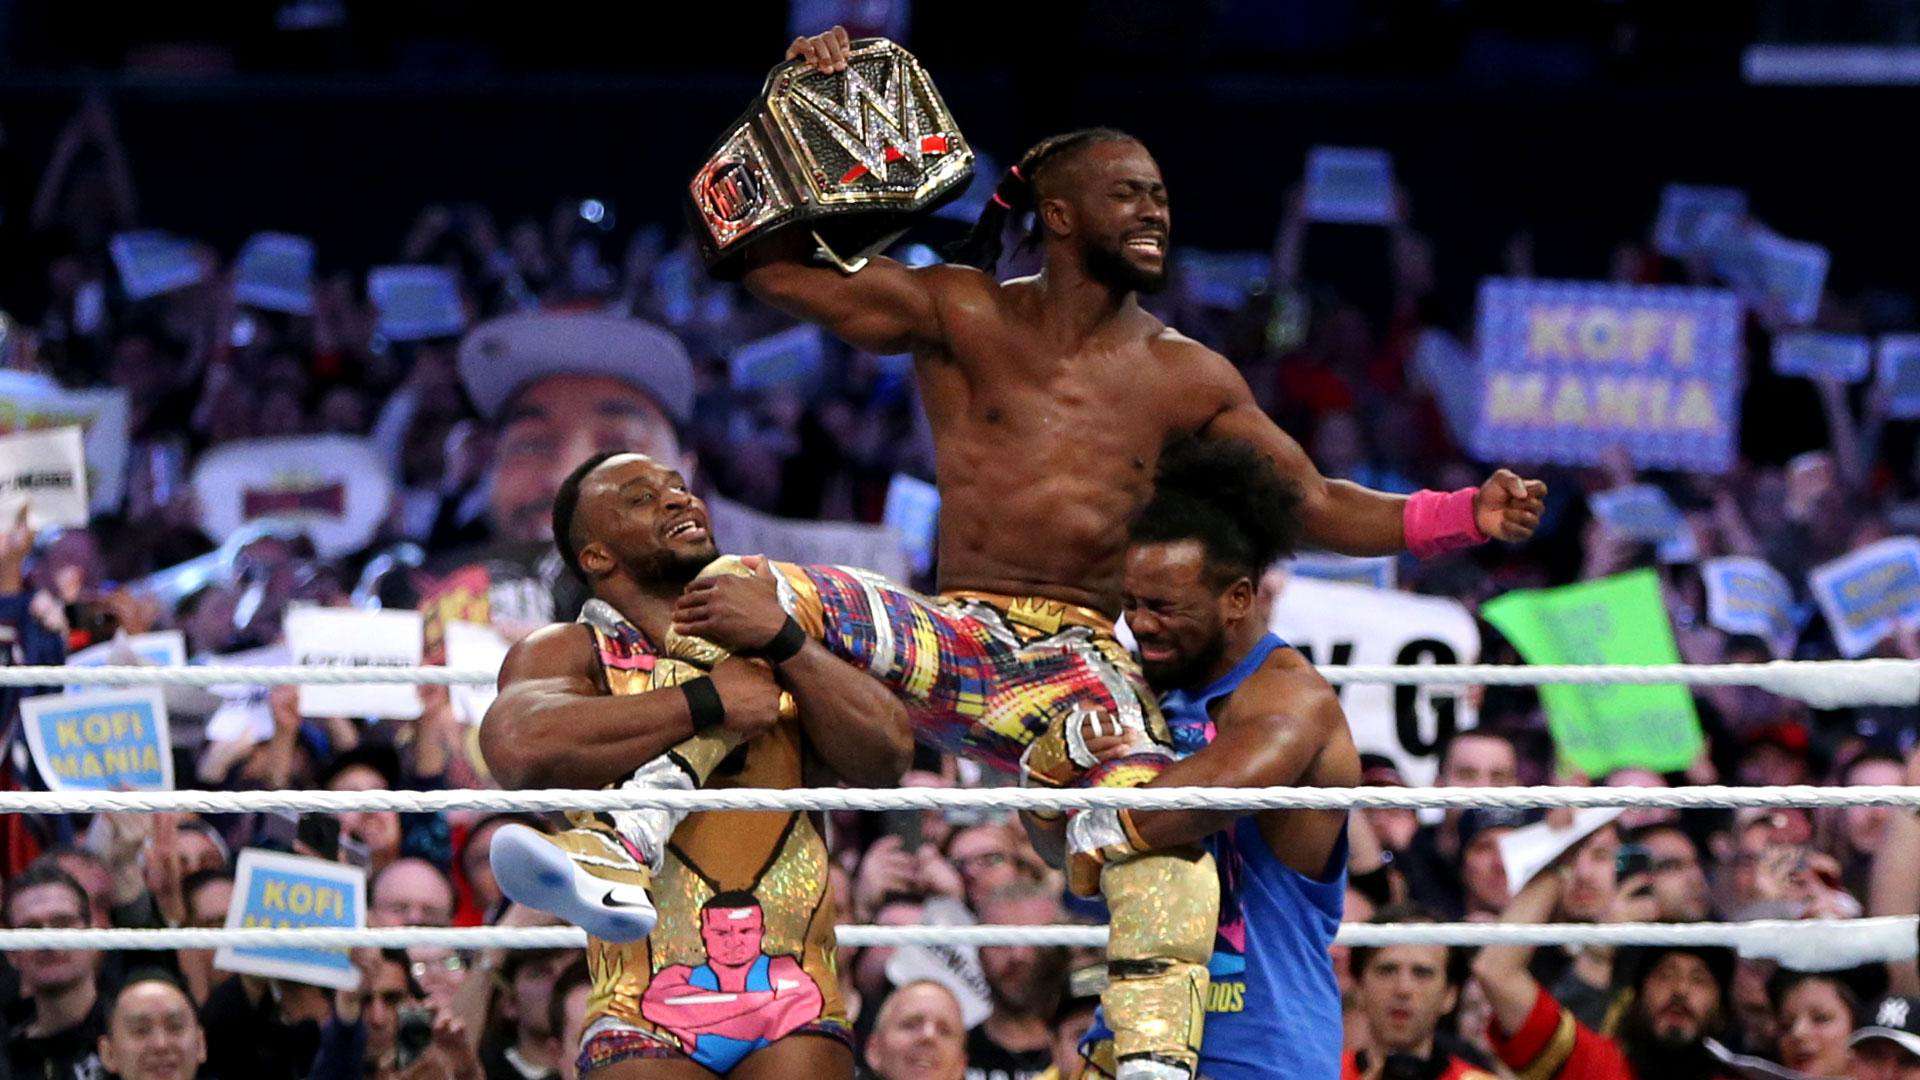 WWE WrestleMania 35 2019: Results, video highlights and live stream